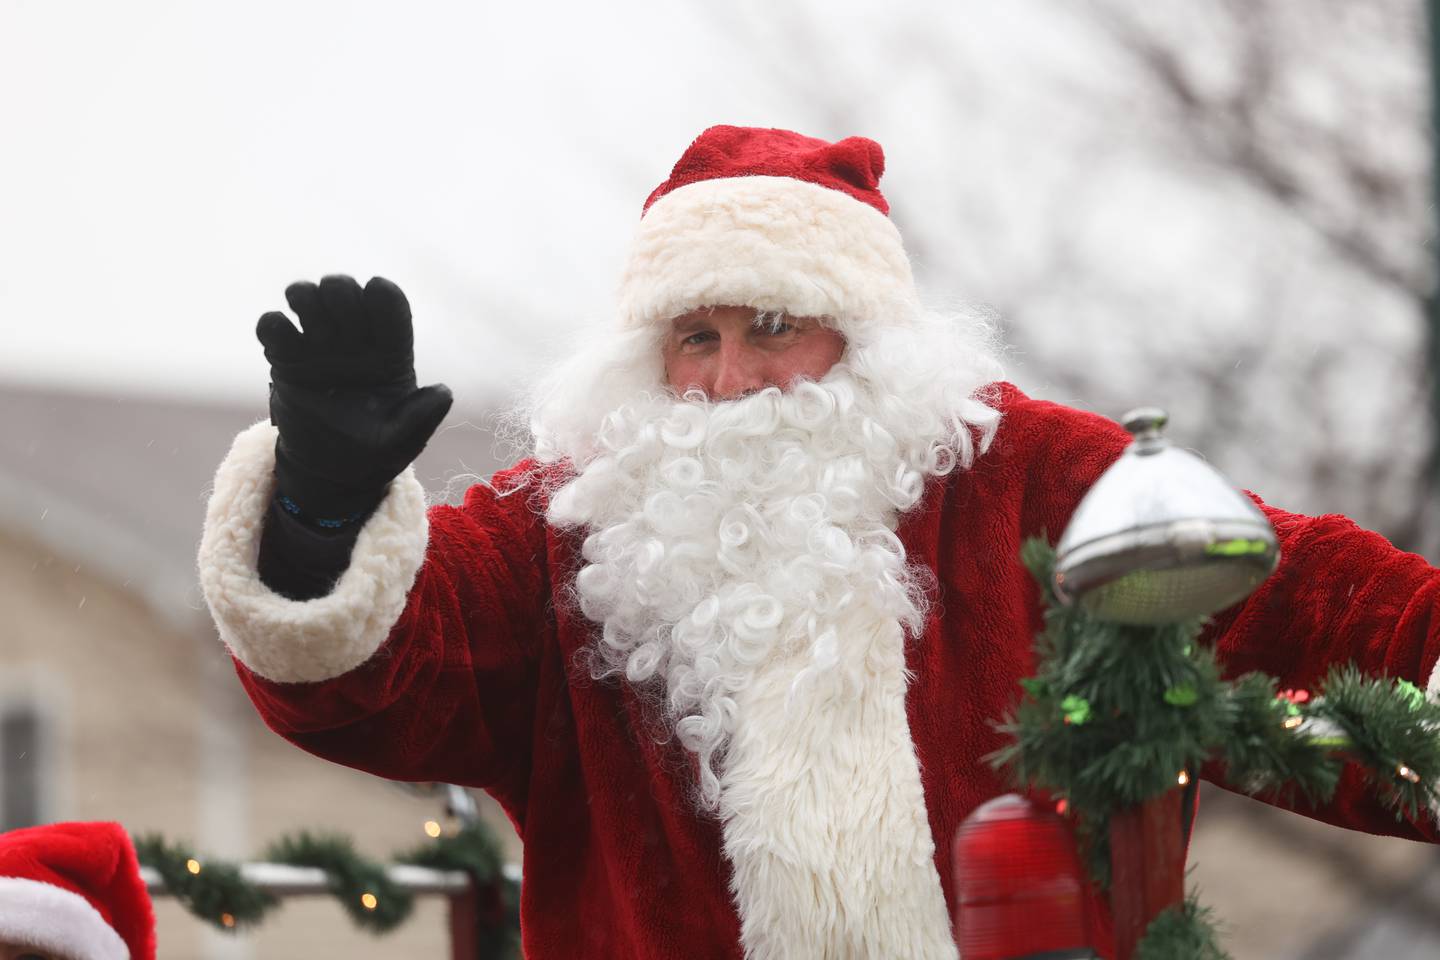 Santa waves to a family as the Joliet police escorts him through Joliet as he heads to the North Pole to get ready for Christmas Eve on Saturday, Dec.16th in Joliet.